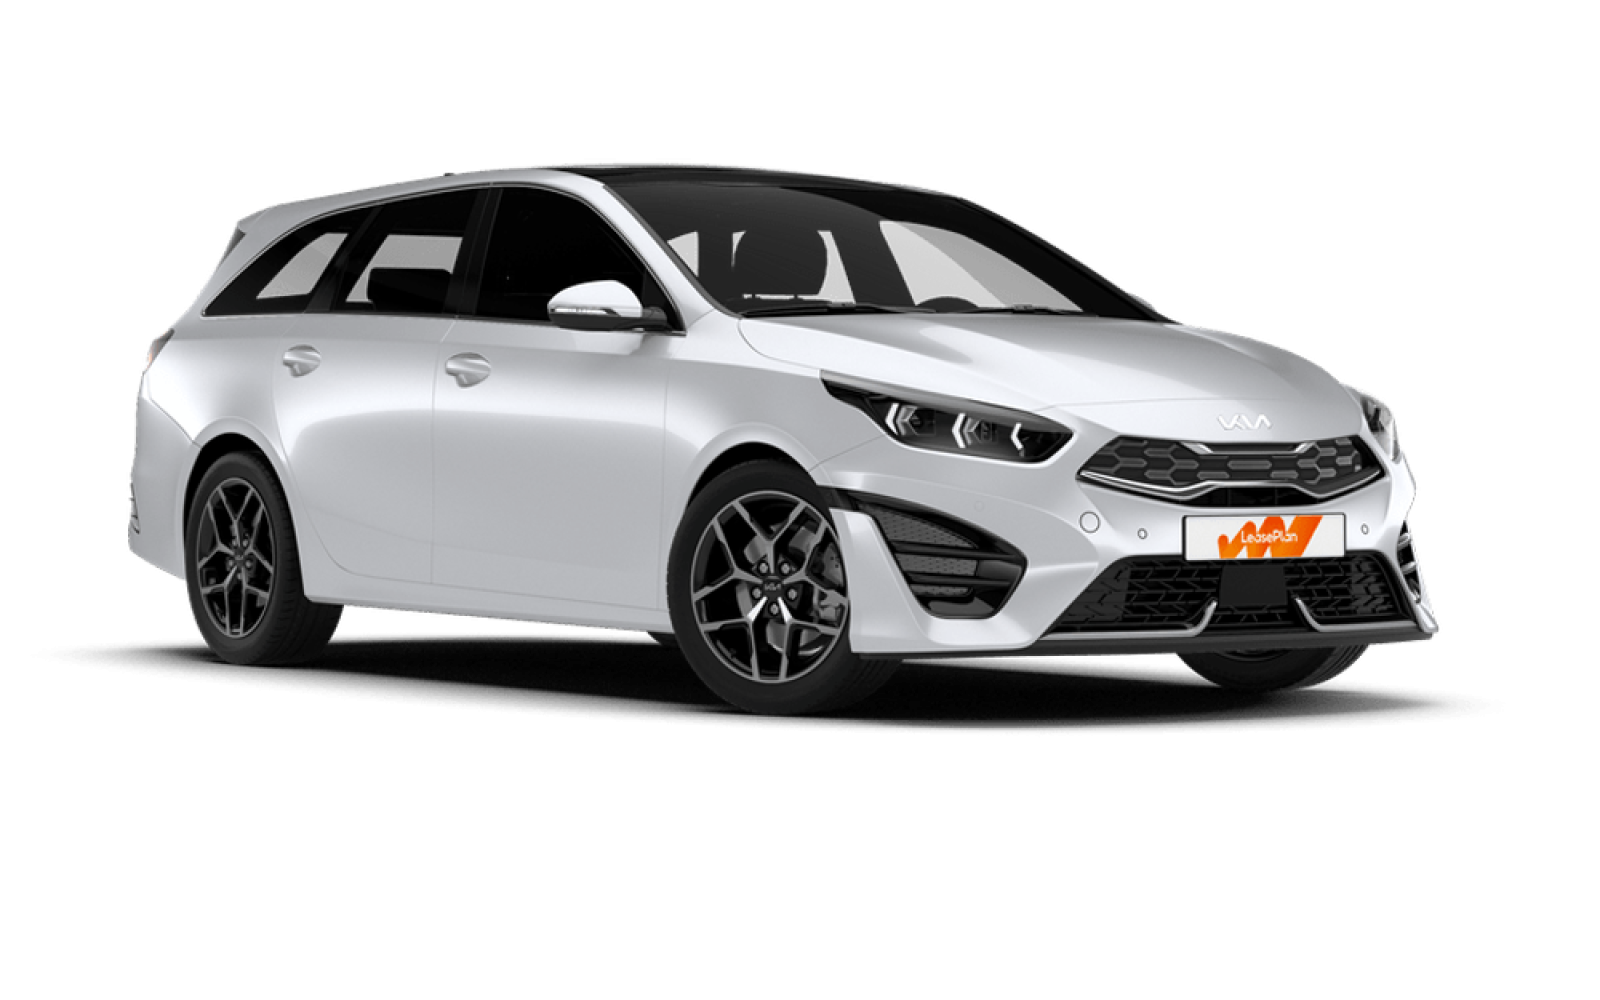 KIA Ceed 1.5 T-GDi 118kW/160k A7 DCT Silver large 2619 - operativní leasing